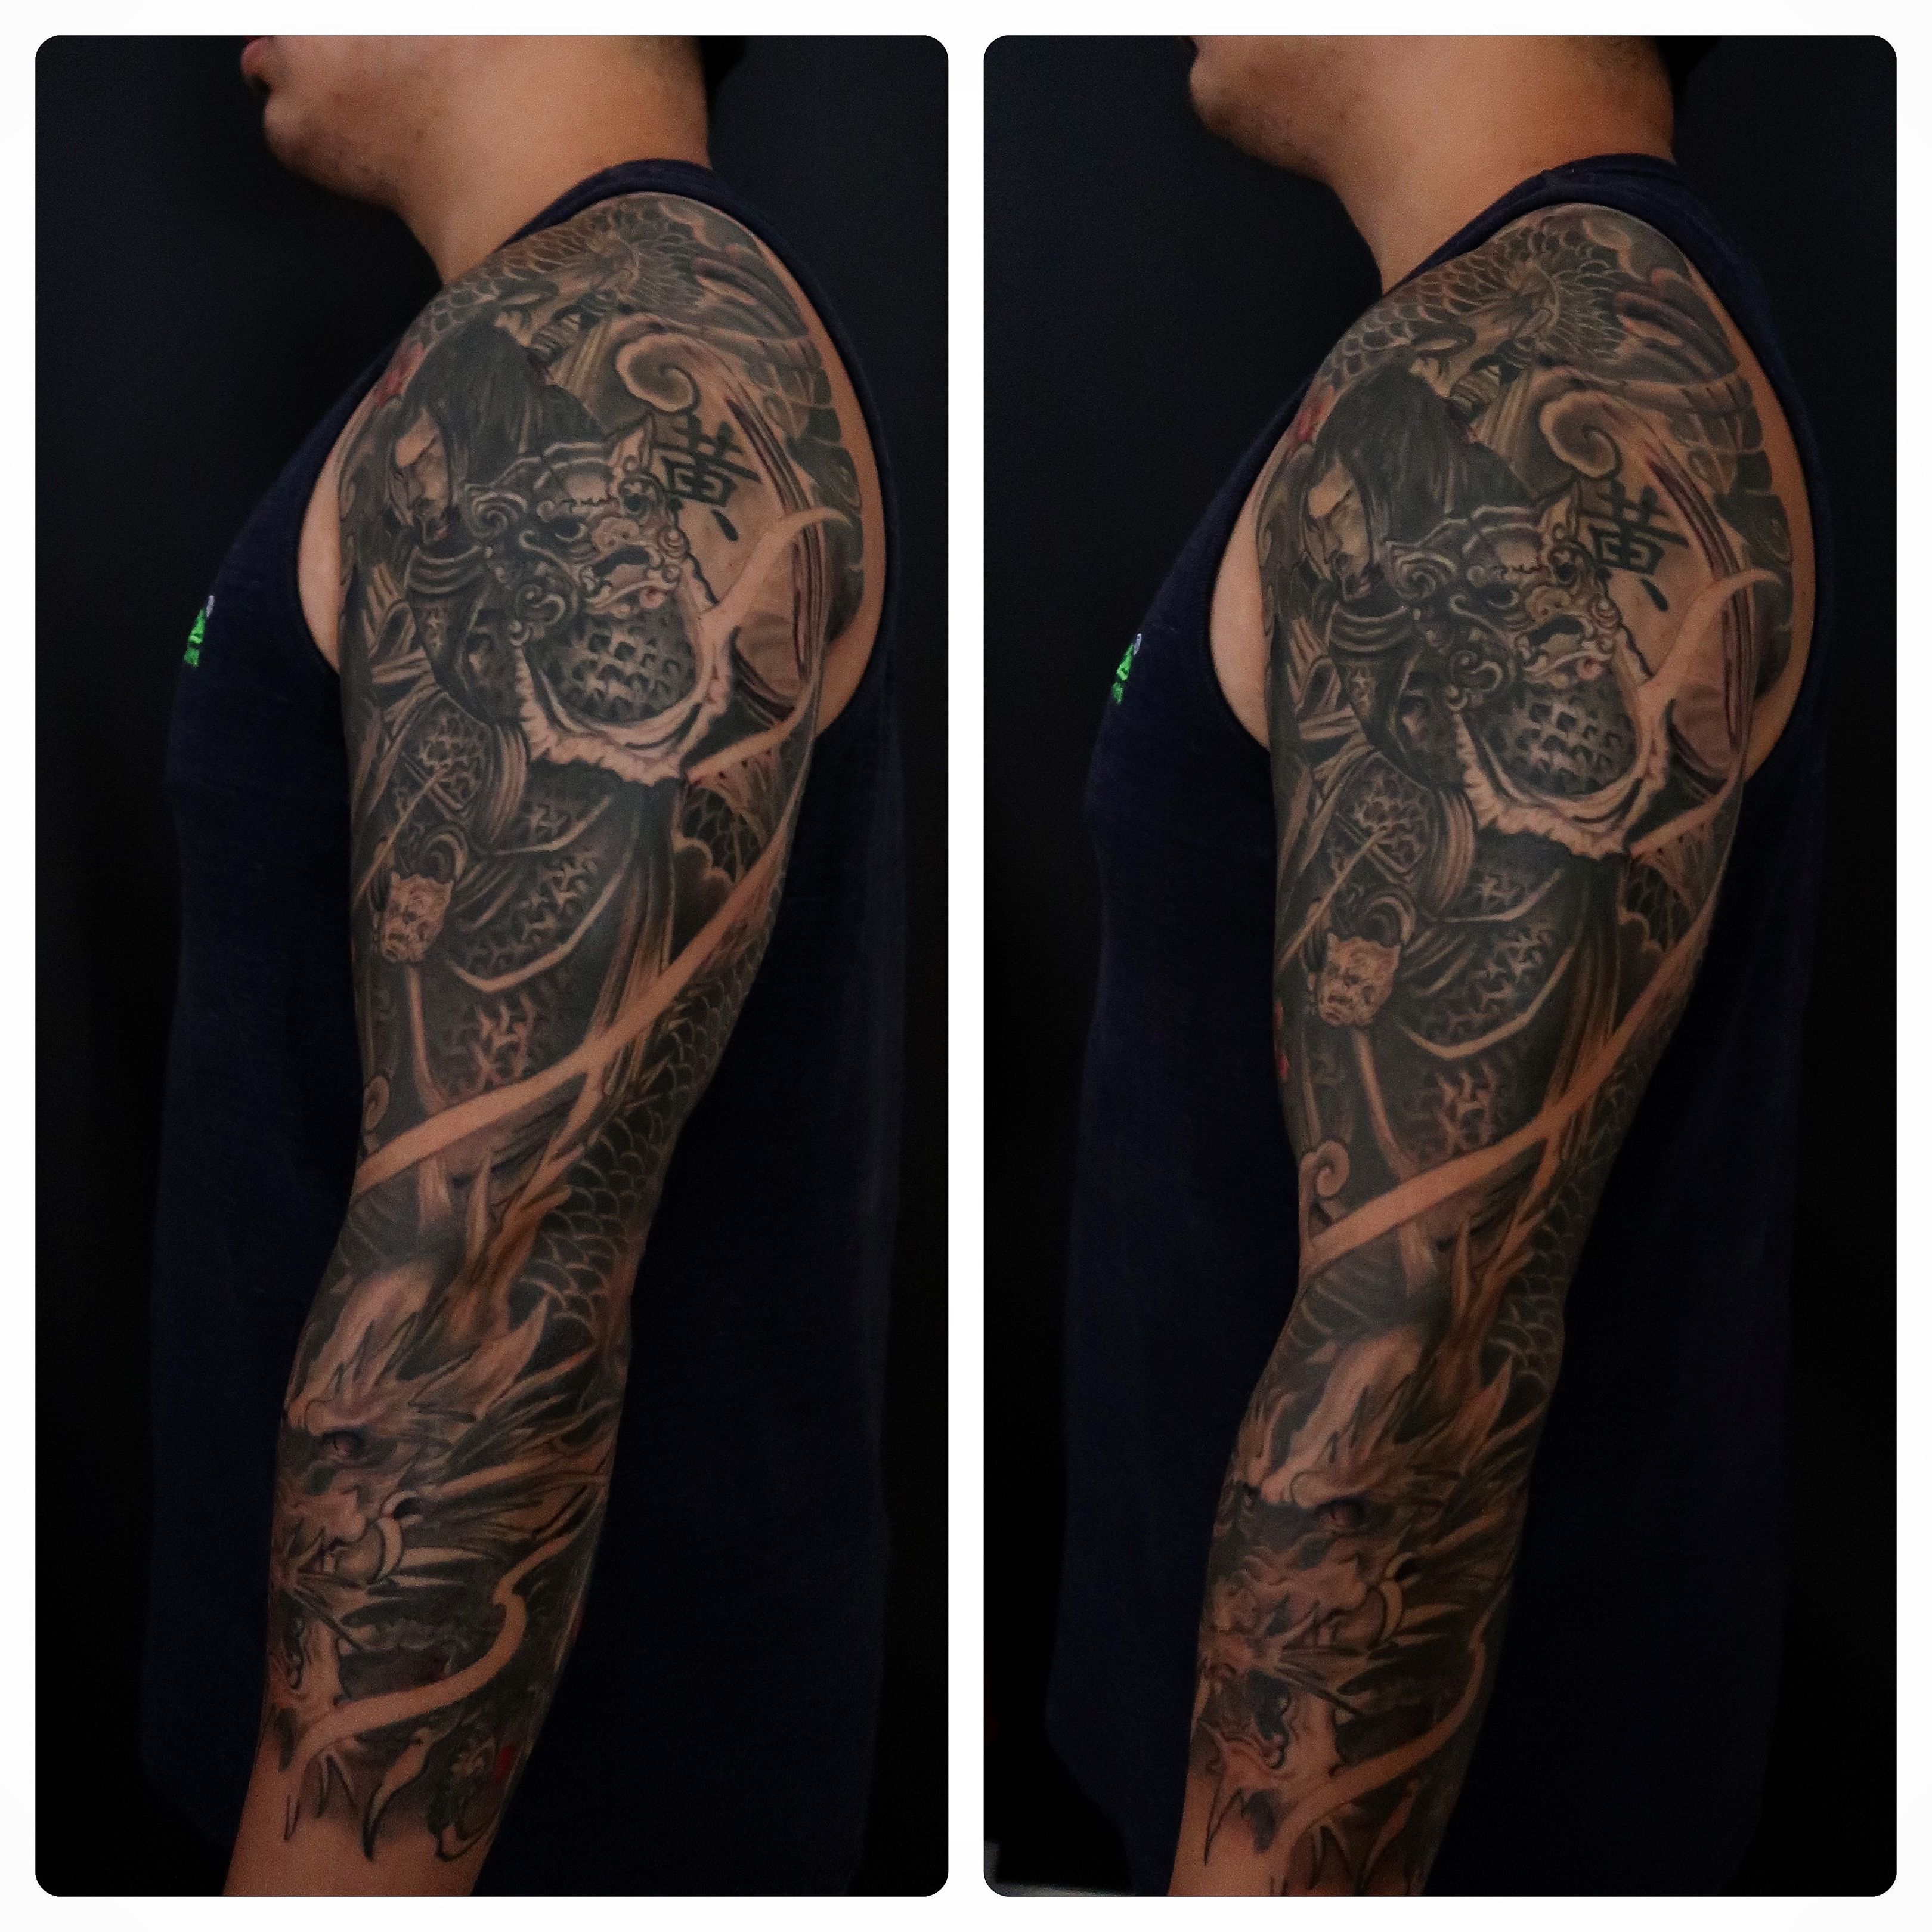 50 Chinese Dragon Tattoo Designs For Men  Flaming Ink Ideas